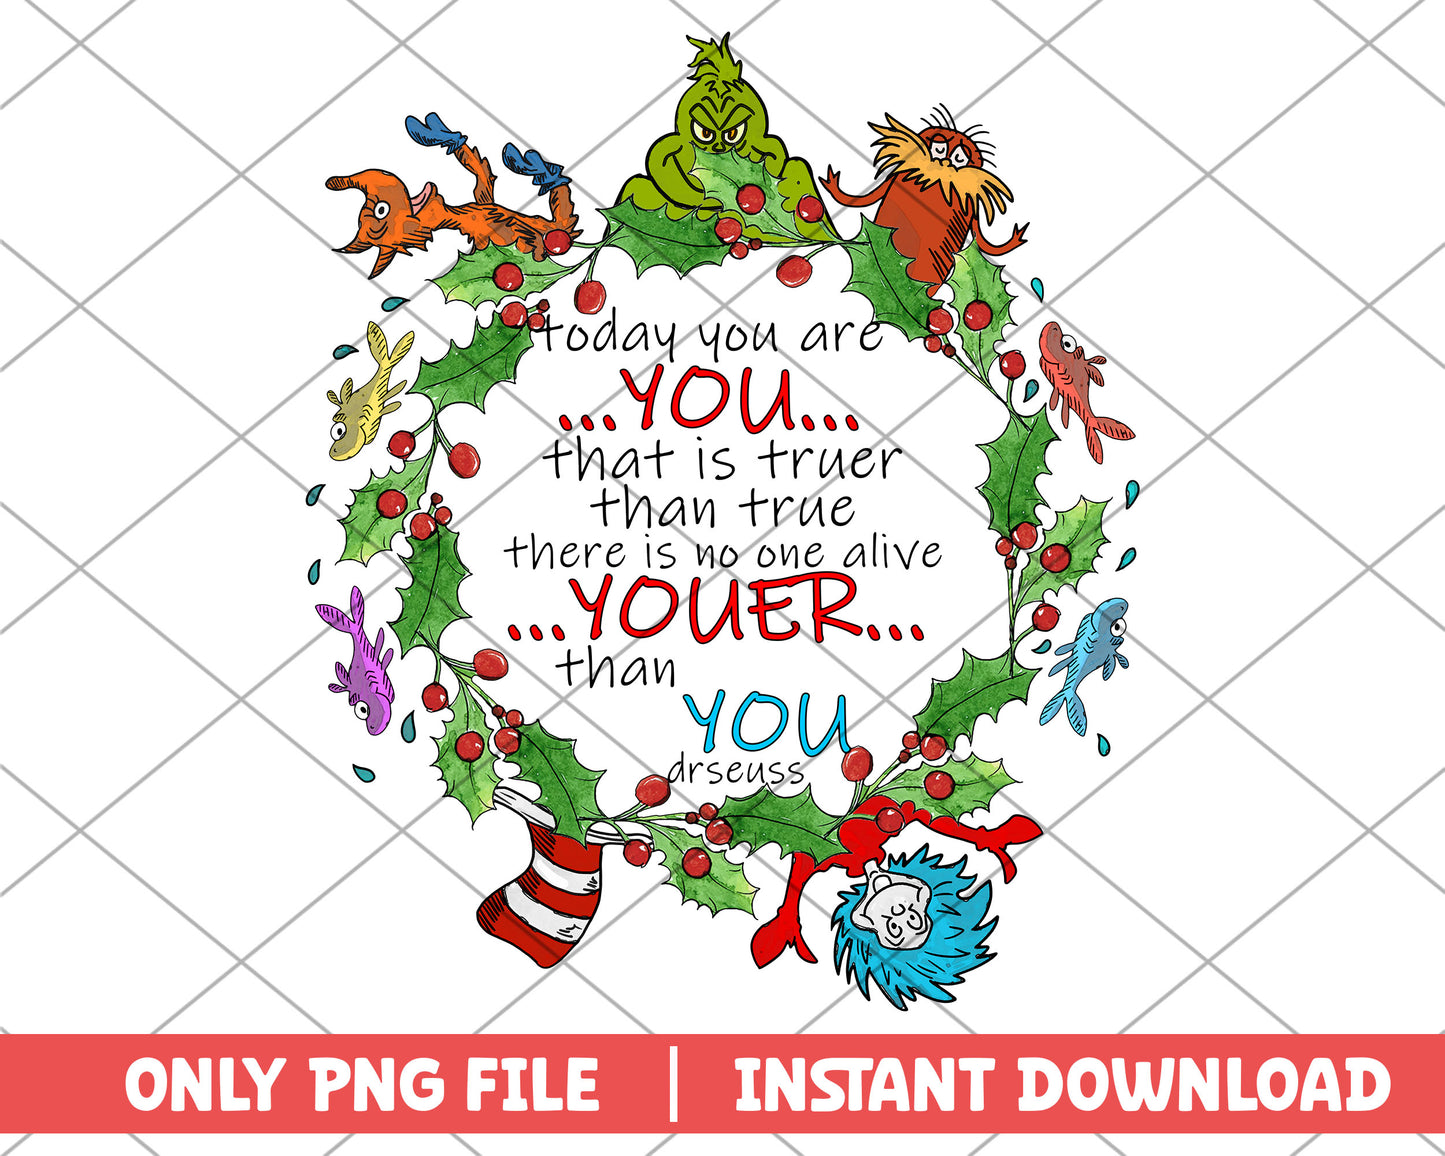 Today you are you dr.seuss png 